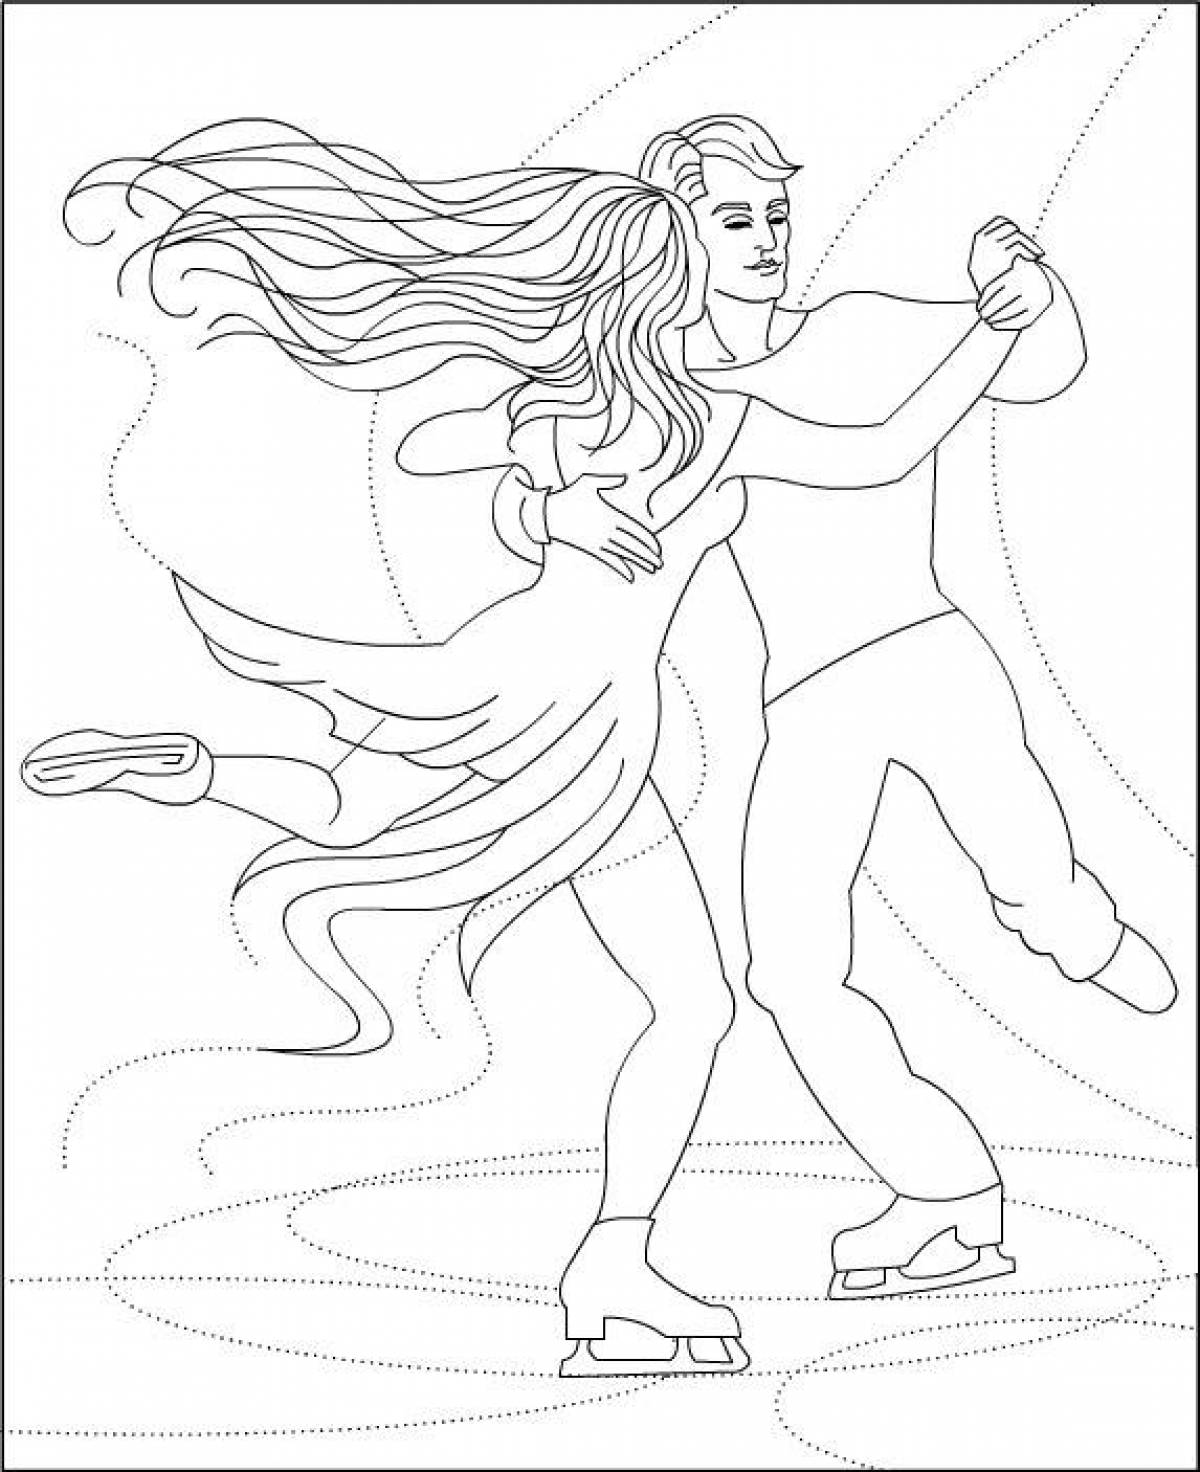 Great figure skating coloring page